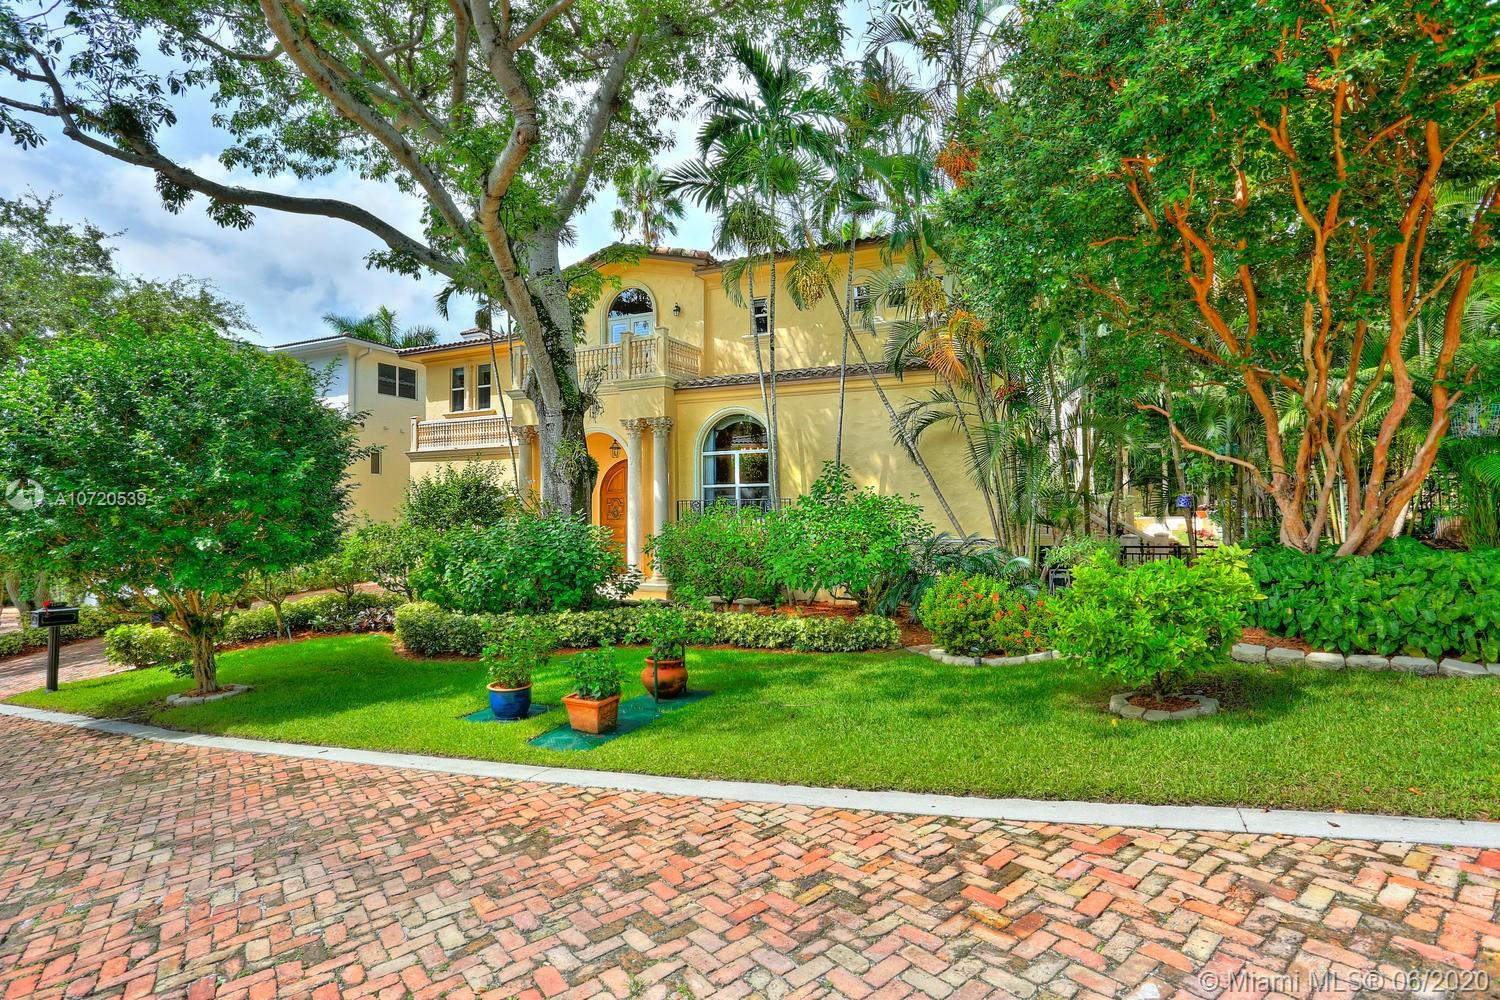 Live in &#x201C;Treasure Trove&#x201D;, an exclusive gated community of only 10 homes just steps from Biscayne Bay. Walk to the Grove village center&#x2019;s galleries, boutiques, cafes and bayfront parks & marinas. Stunning European-style villa with light-filled living spaces, dramatic double-height ceilings and the finest fixtures & finishes throughout. Elegant formal living & dining rooms with expansive windows that overlook lush greenery & the tree canopy. Custom kitchen features wood cabinetry, wine refrigeration, gas range and center island w/ bar seating. Luxurious master suite & marble bath w/ soaking tub & frameless glass shower.  Large family room features built-in cabinetry and floor-to-ceiling glass overlooking the spectacular garden with footbridge & winding pathways surrounding the tropical pool.